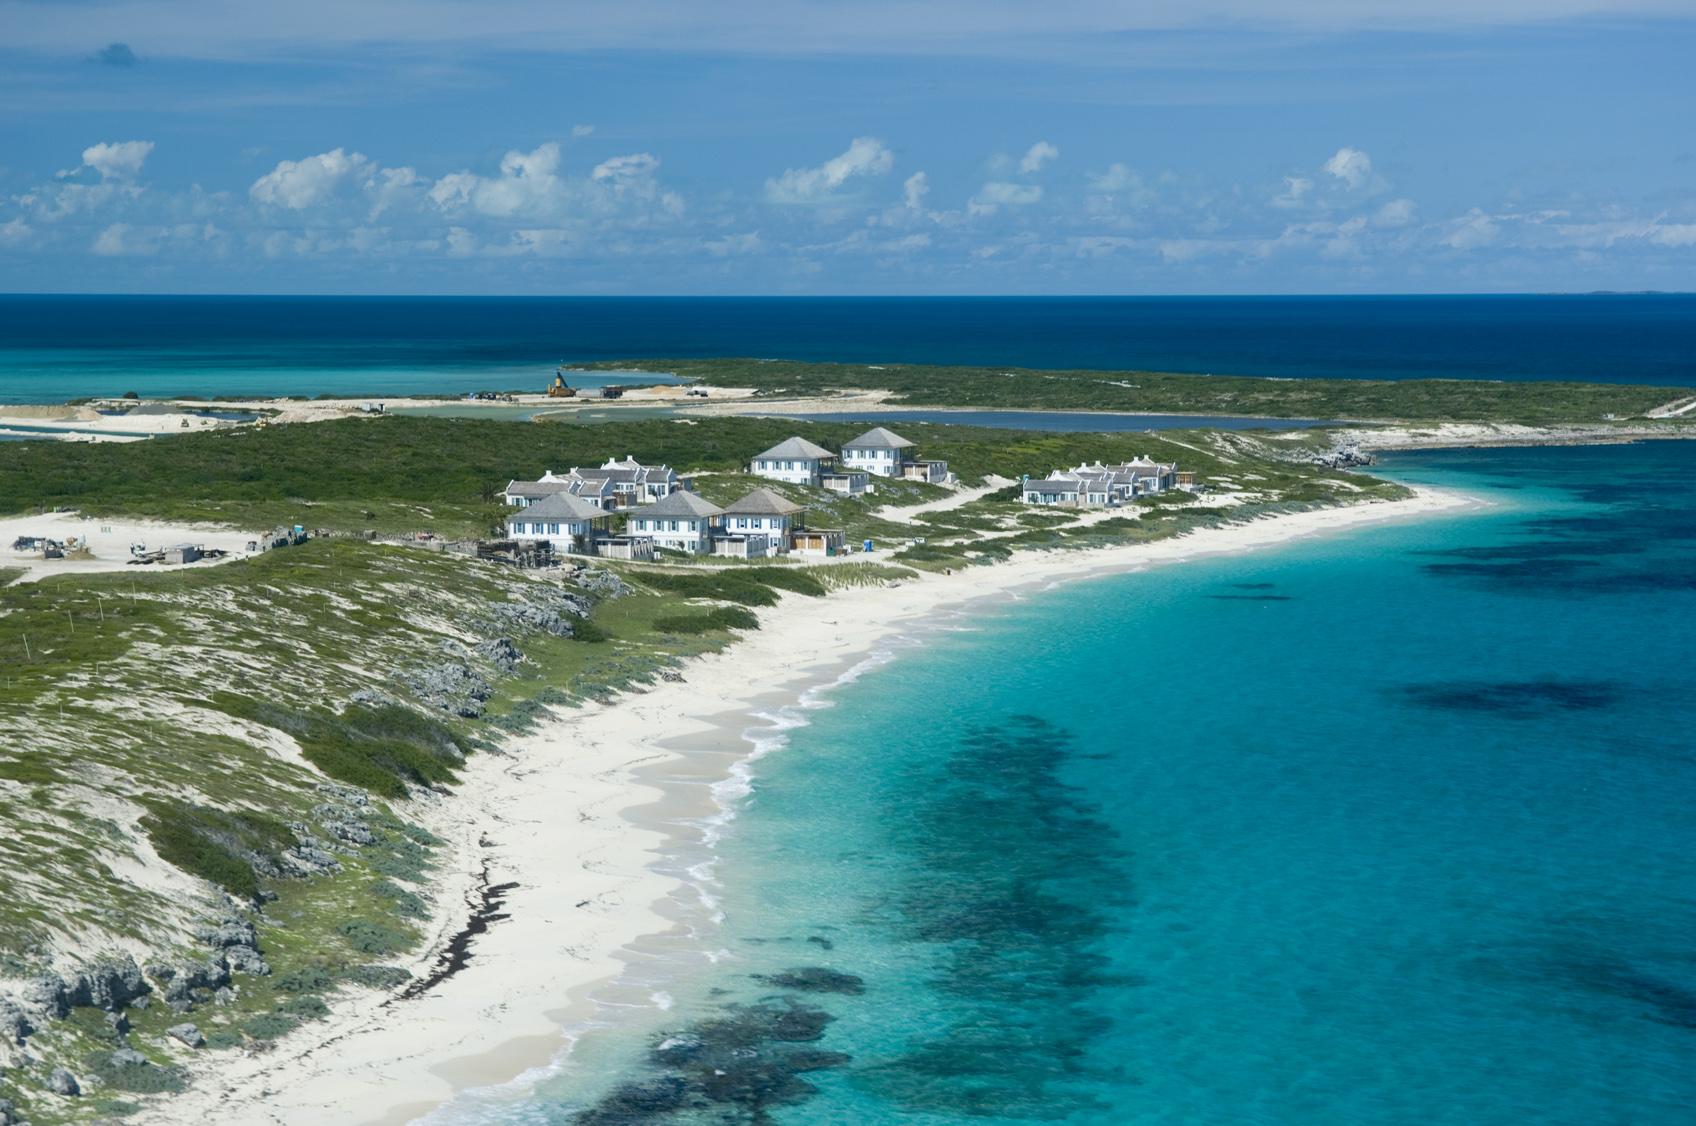 The 1,100-acre private island is three miles long and one mile wide, with eight miles of beaches and shoreline.